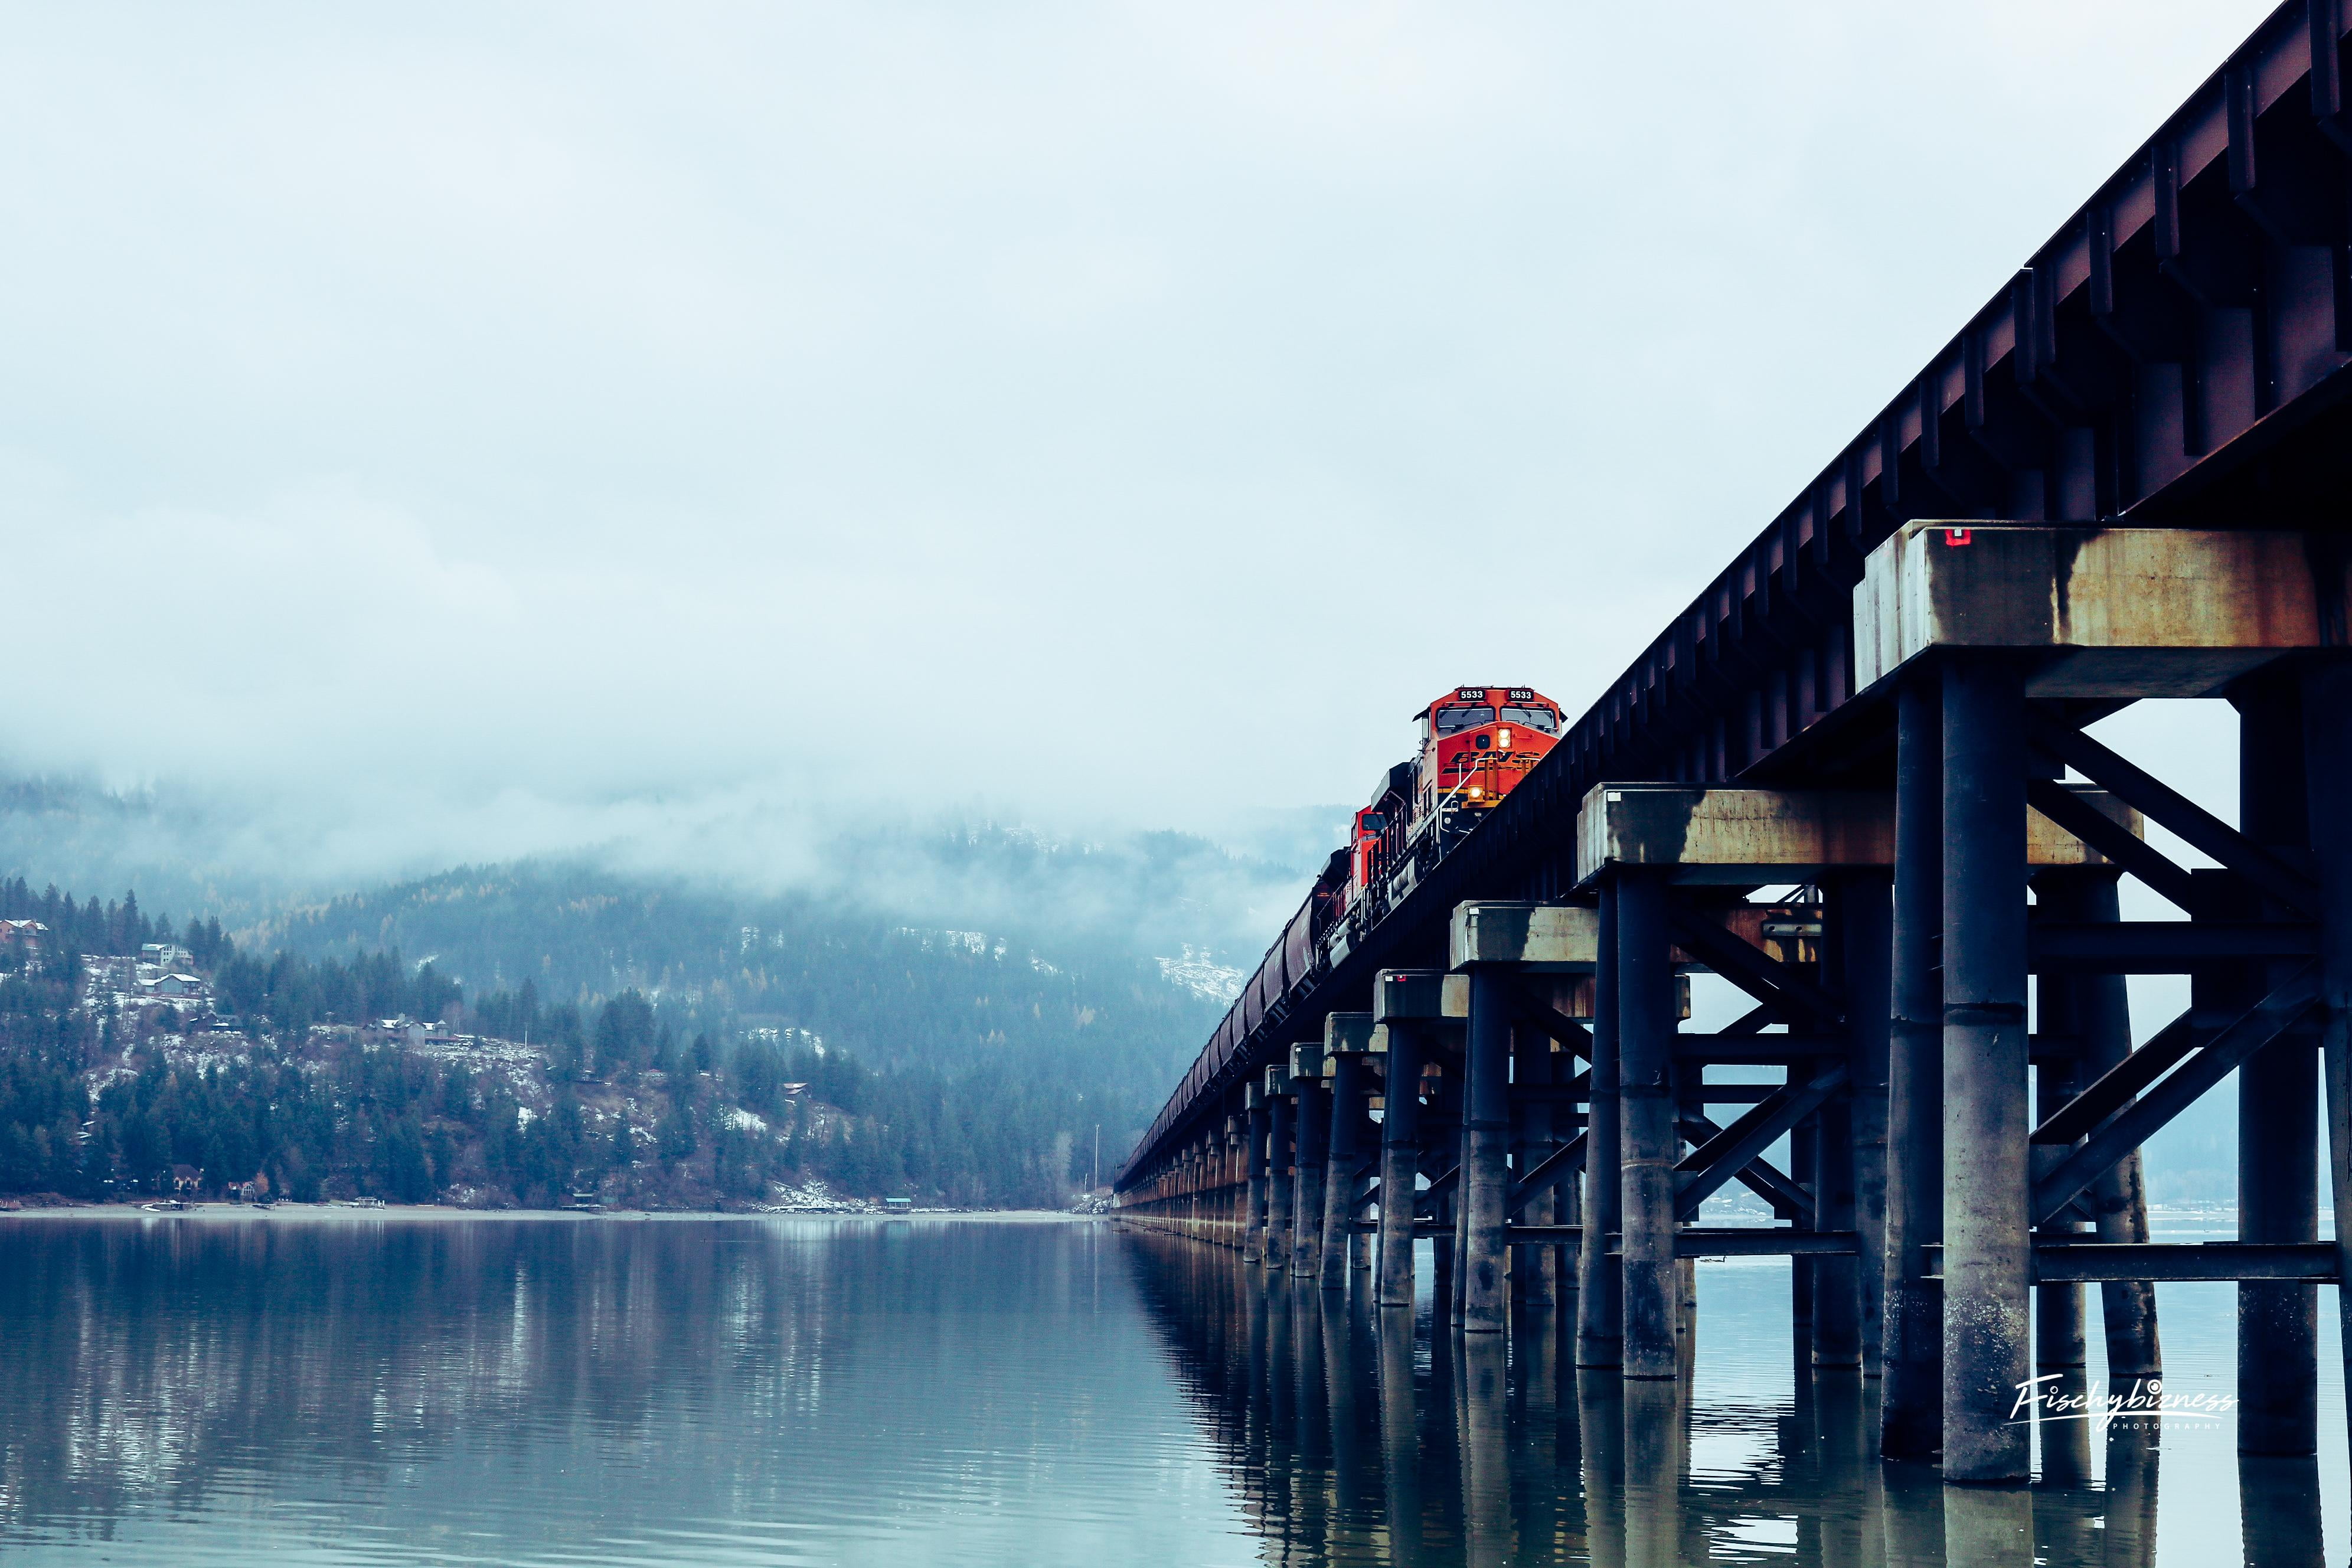 red and black train, bridge, water, trees, mountains, clouds